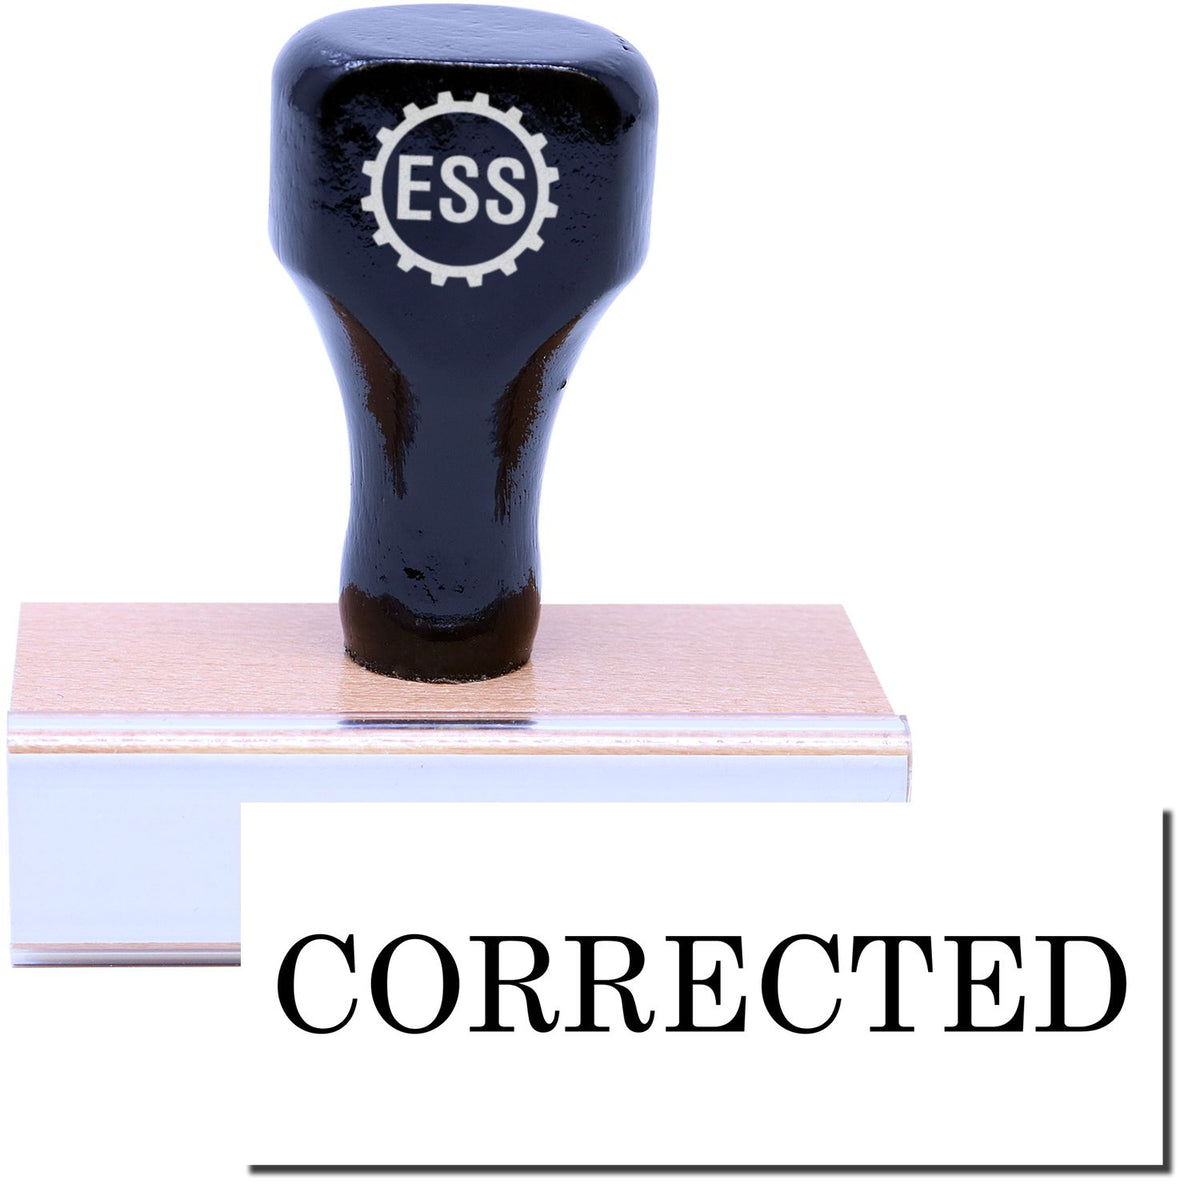 A stock office rubber stamp with a stamped image showing how the text &quot;CORRECTED&quot; is displayed after stamping.